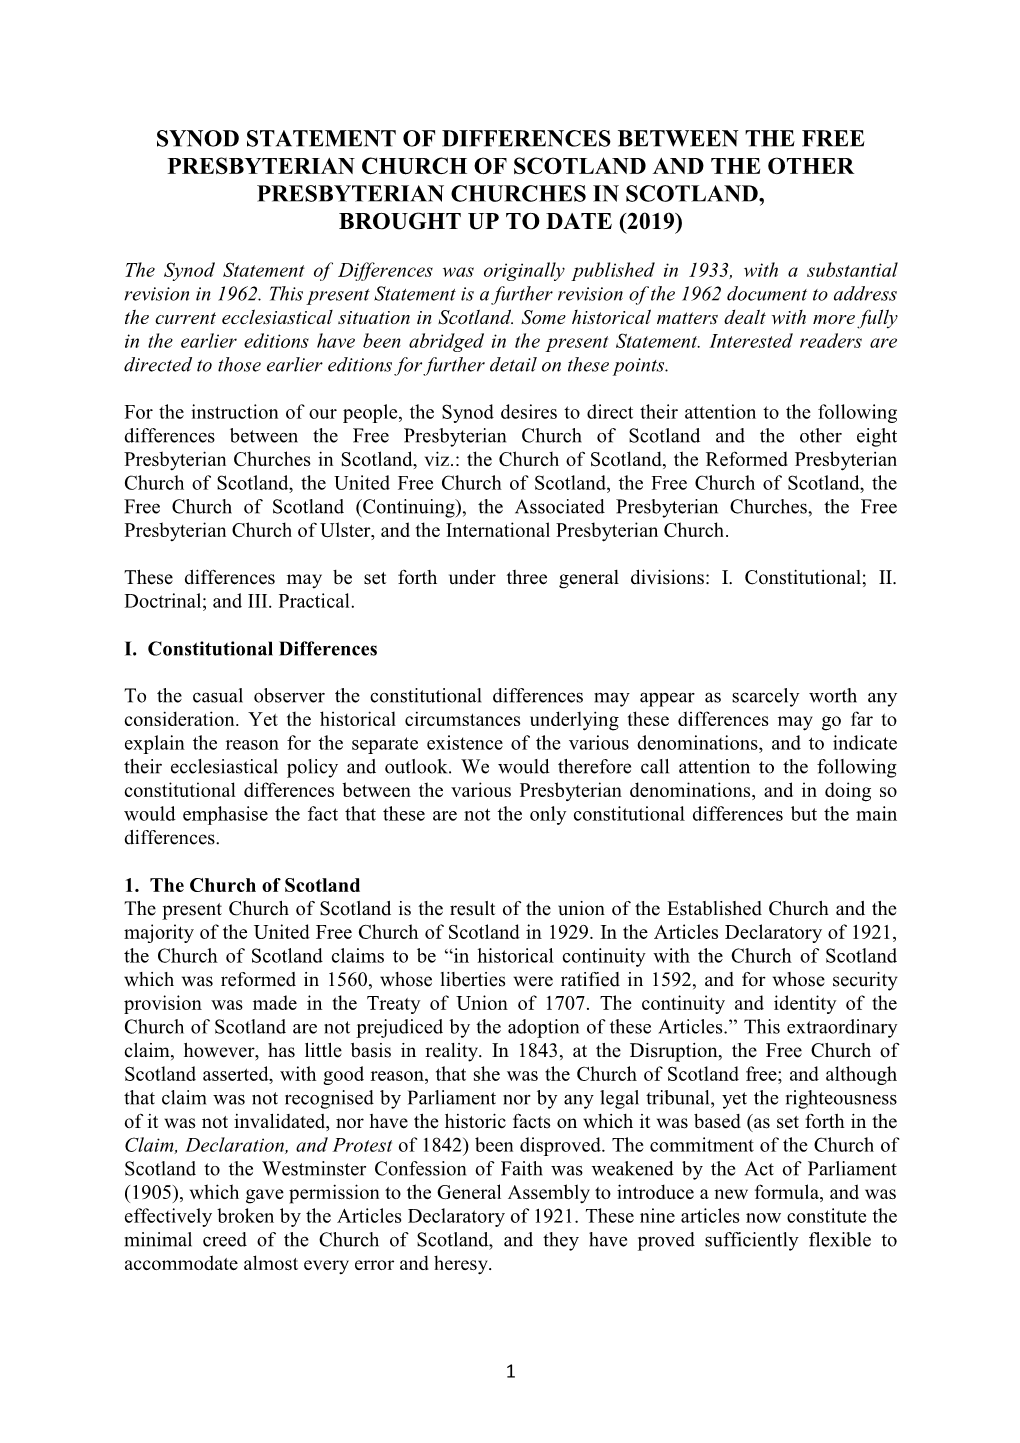 Statement of Differences Between the Free Presbyterian Church of Scotland and the Other Presbyterian Churches in Scotland, Brought up to Date (2019)